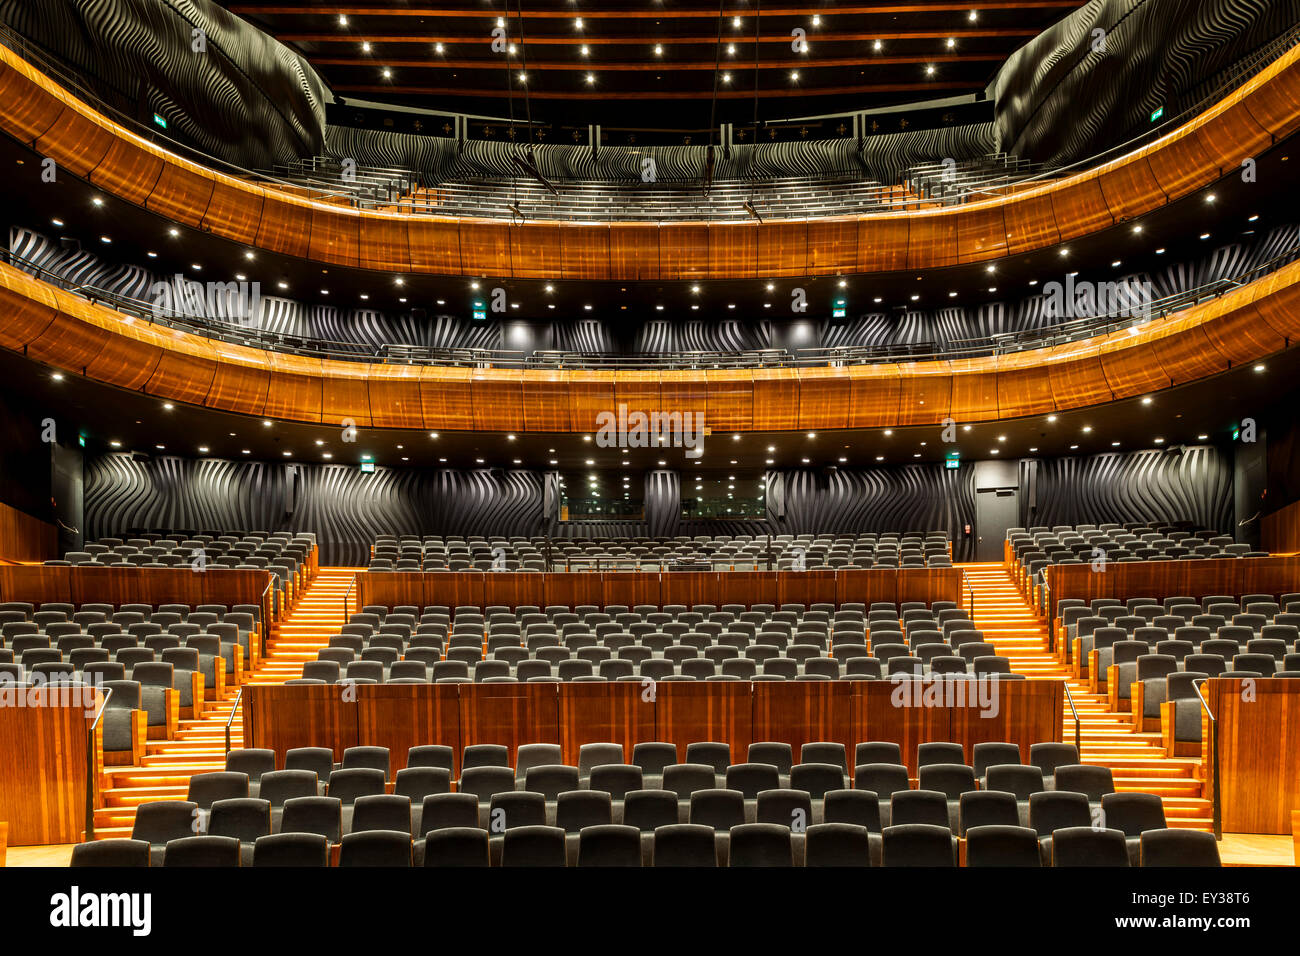 View of grand concert hall with seating and circles. National Polish Radio Symphony Orchestra (NOSPR), Katowice, Poland. Archite Stock Photo